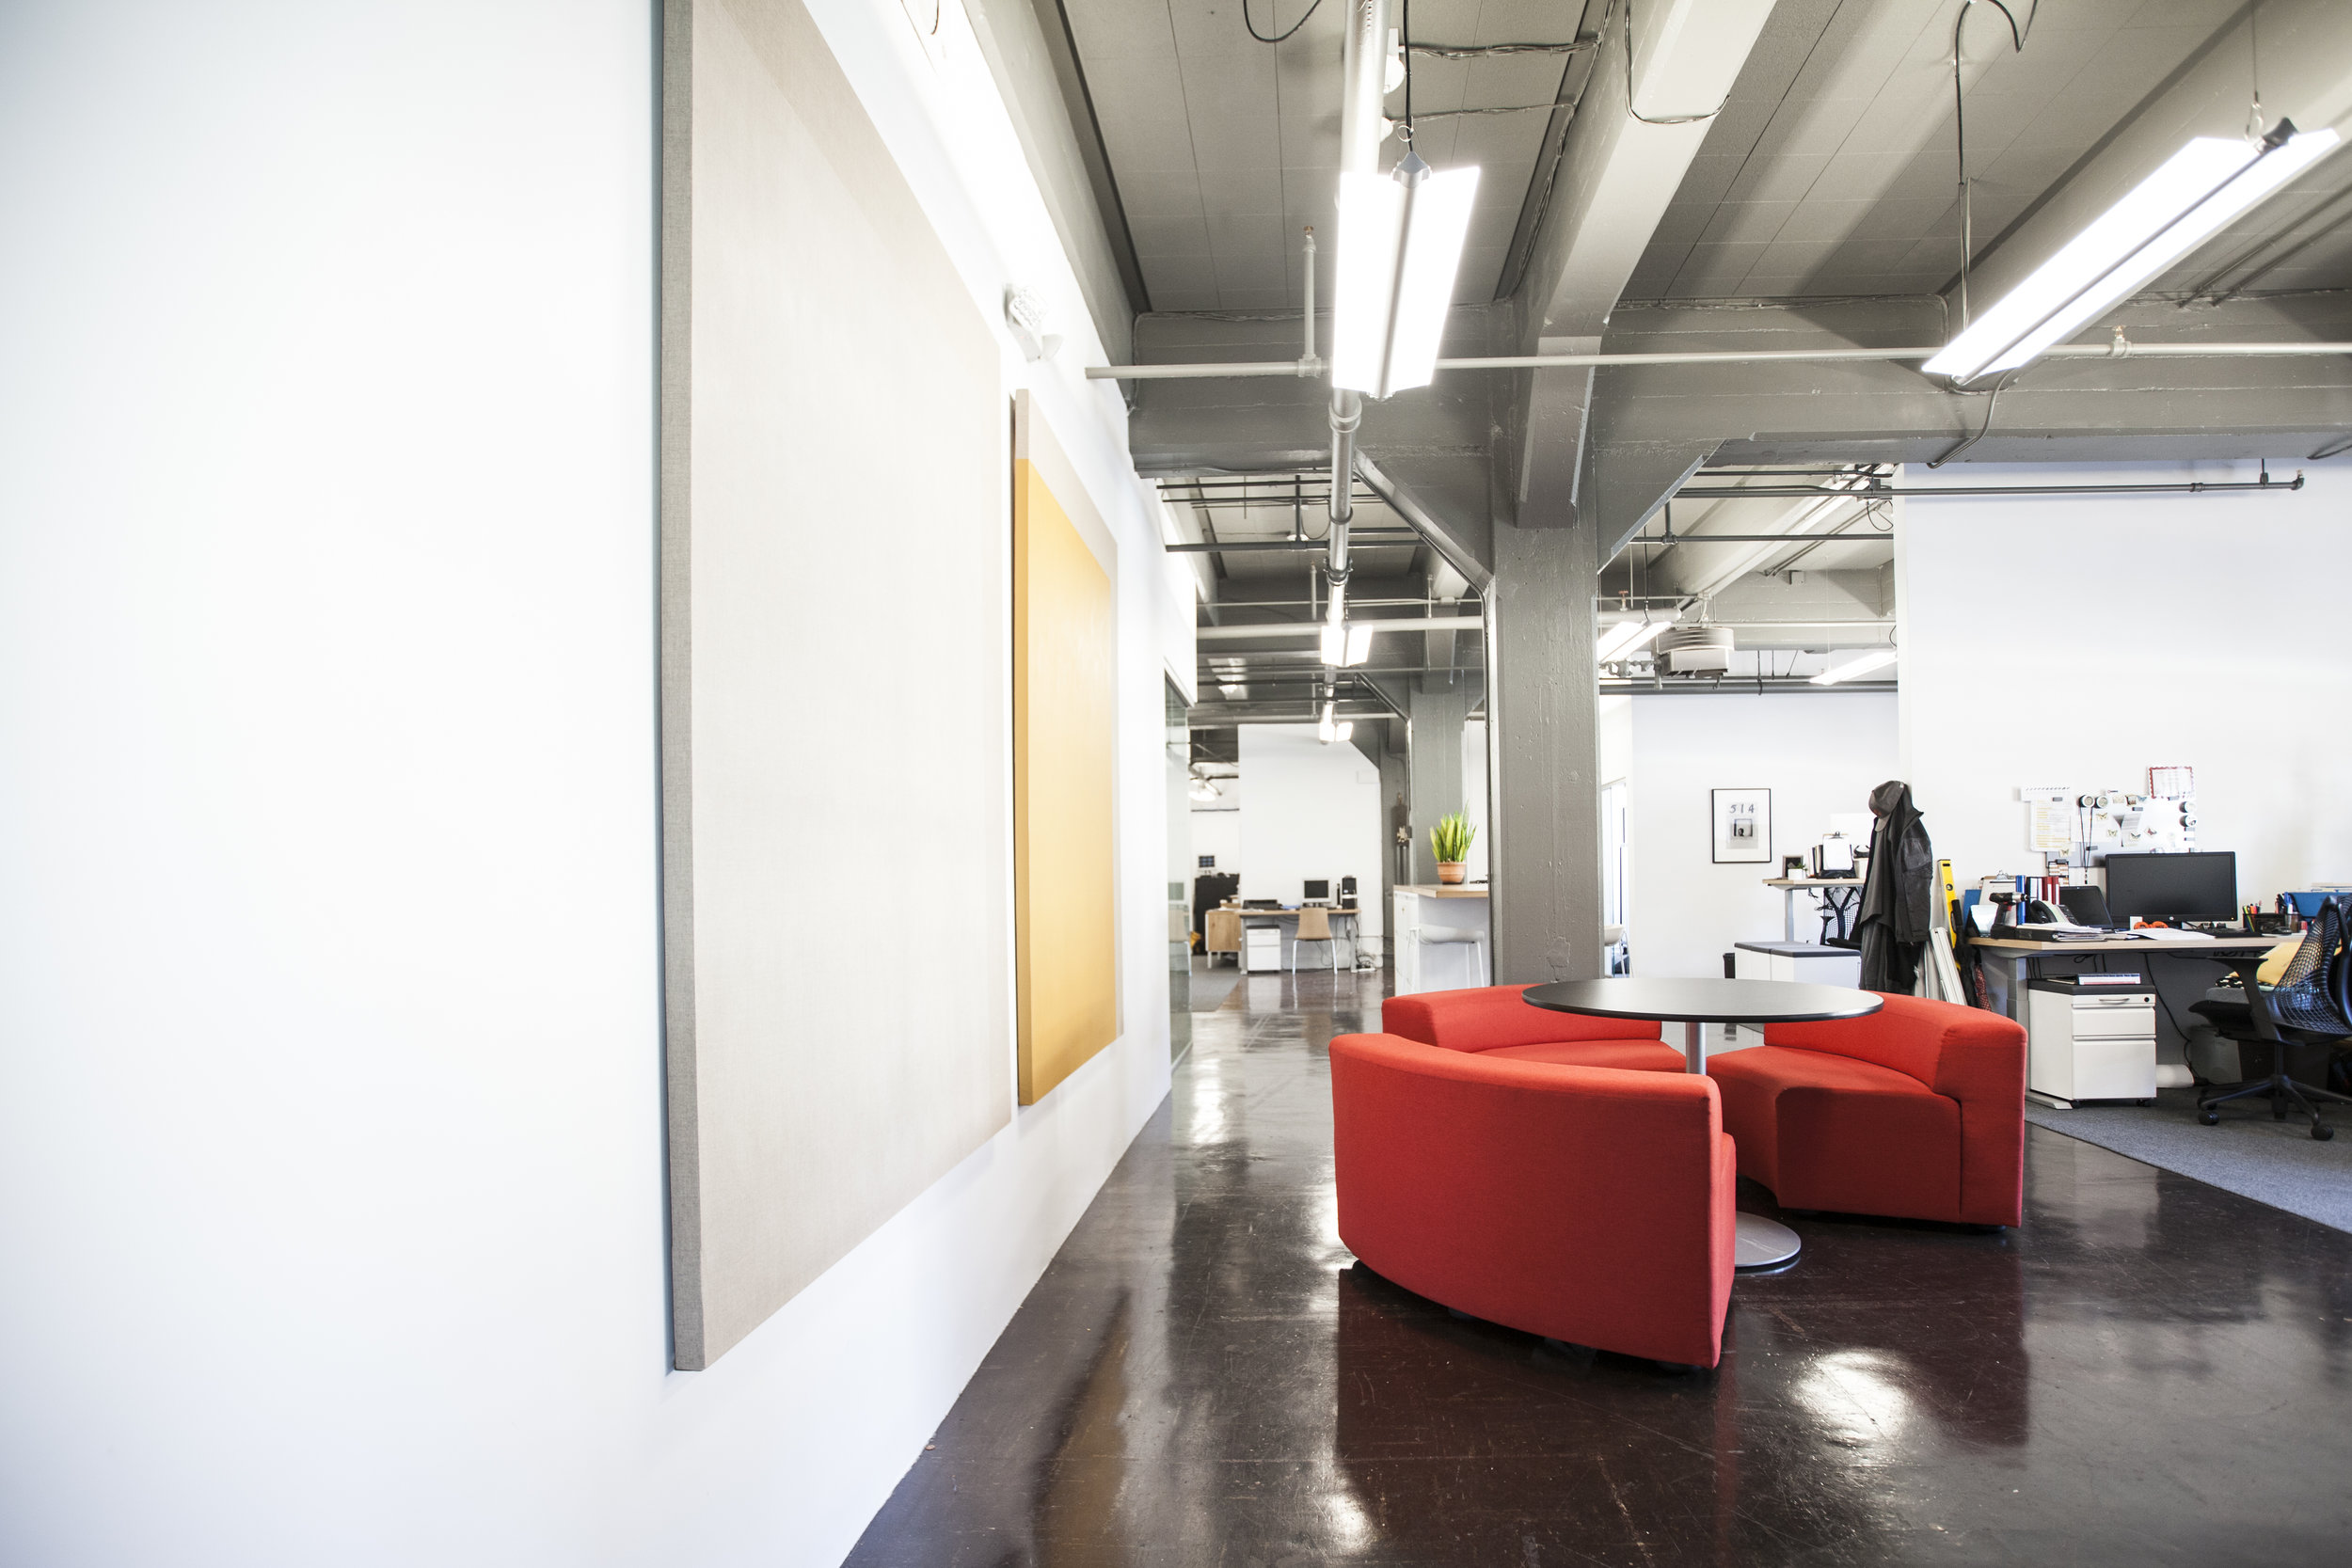  Simple seating and meeting areas throughout the space break up an open office. 